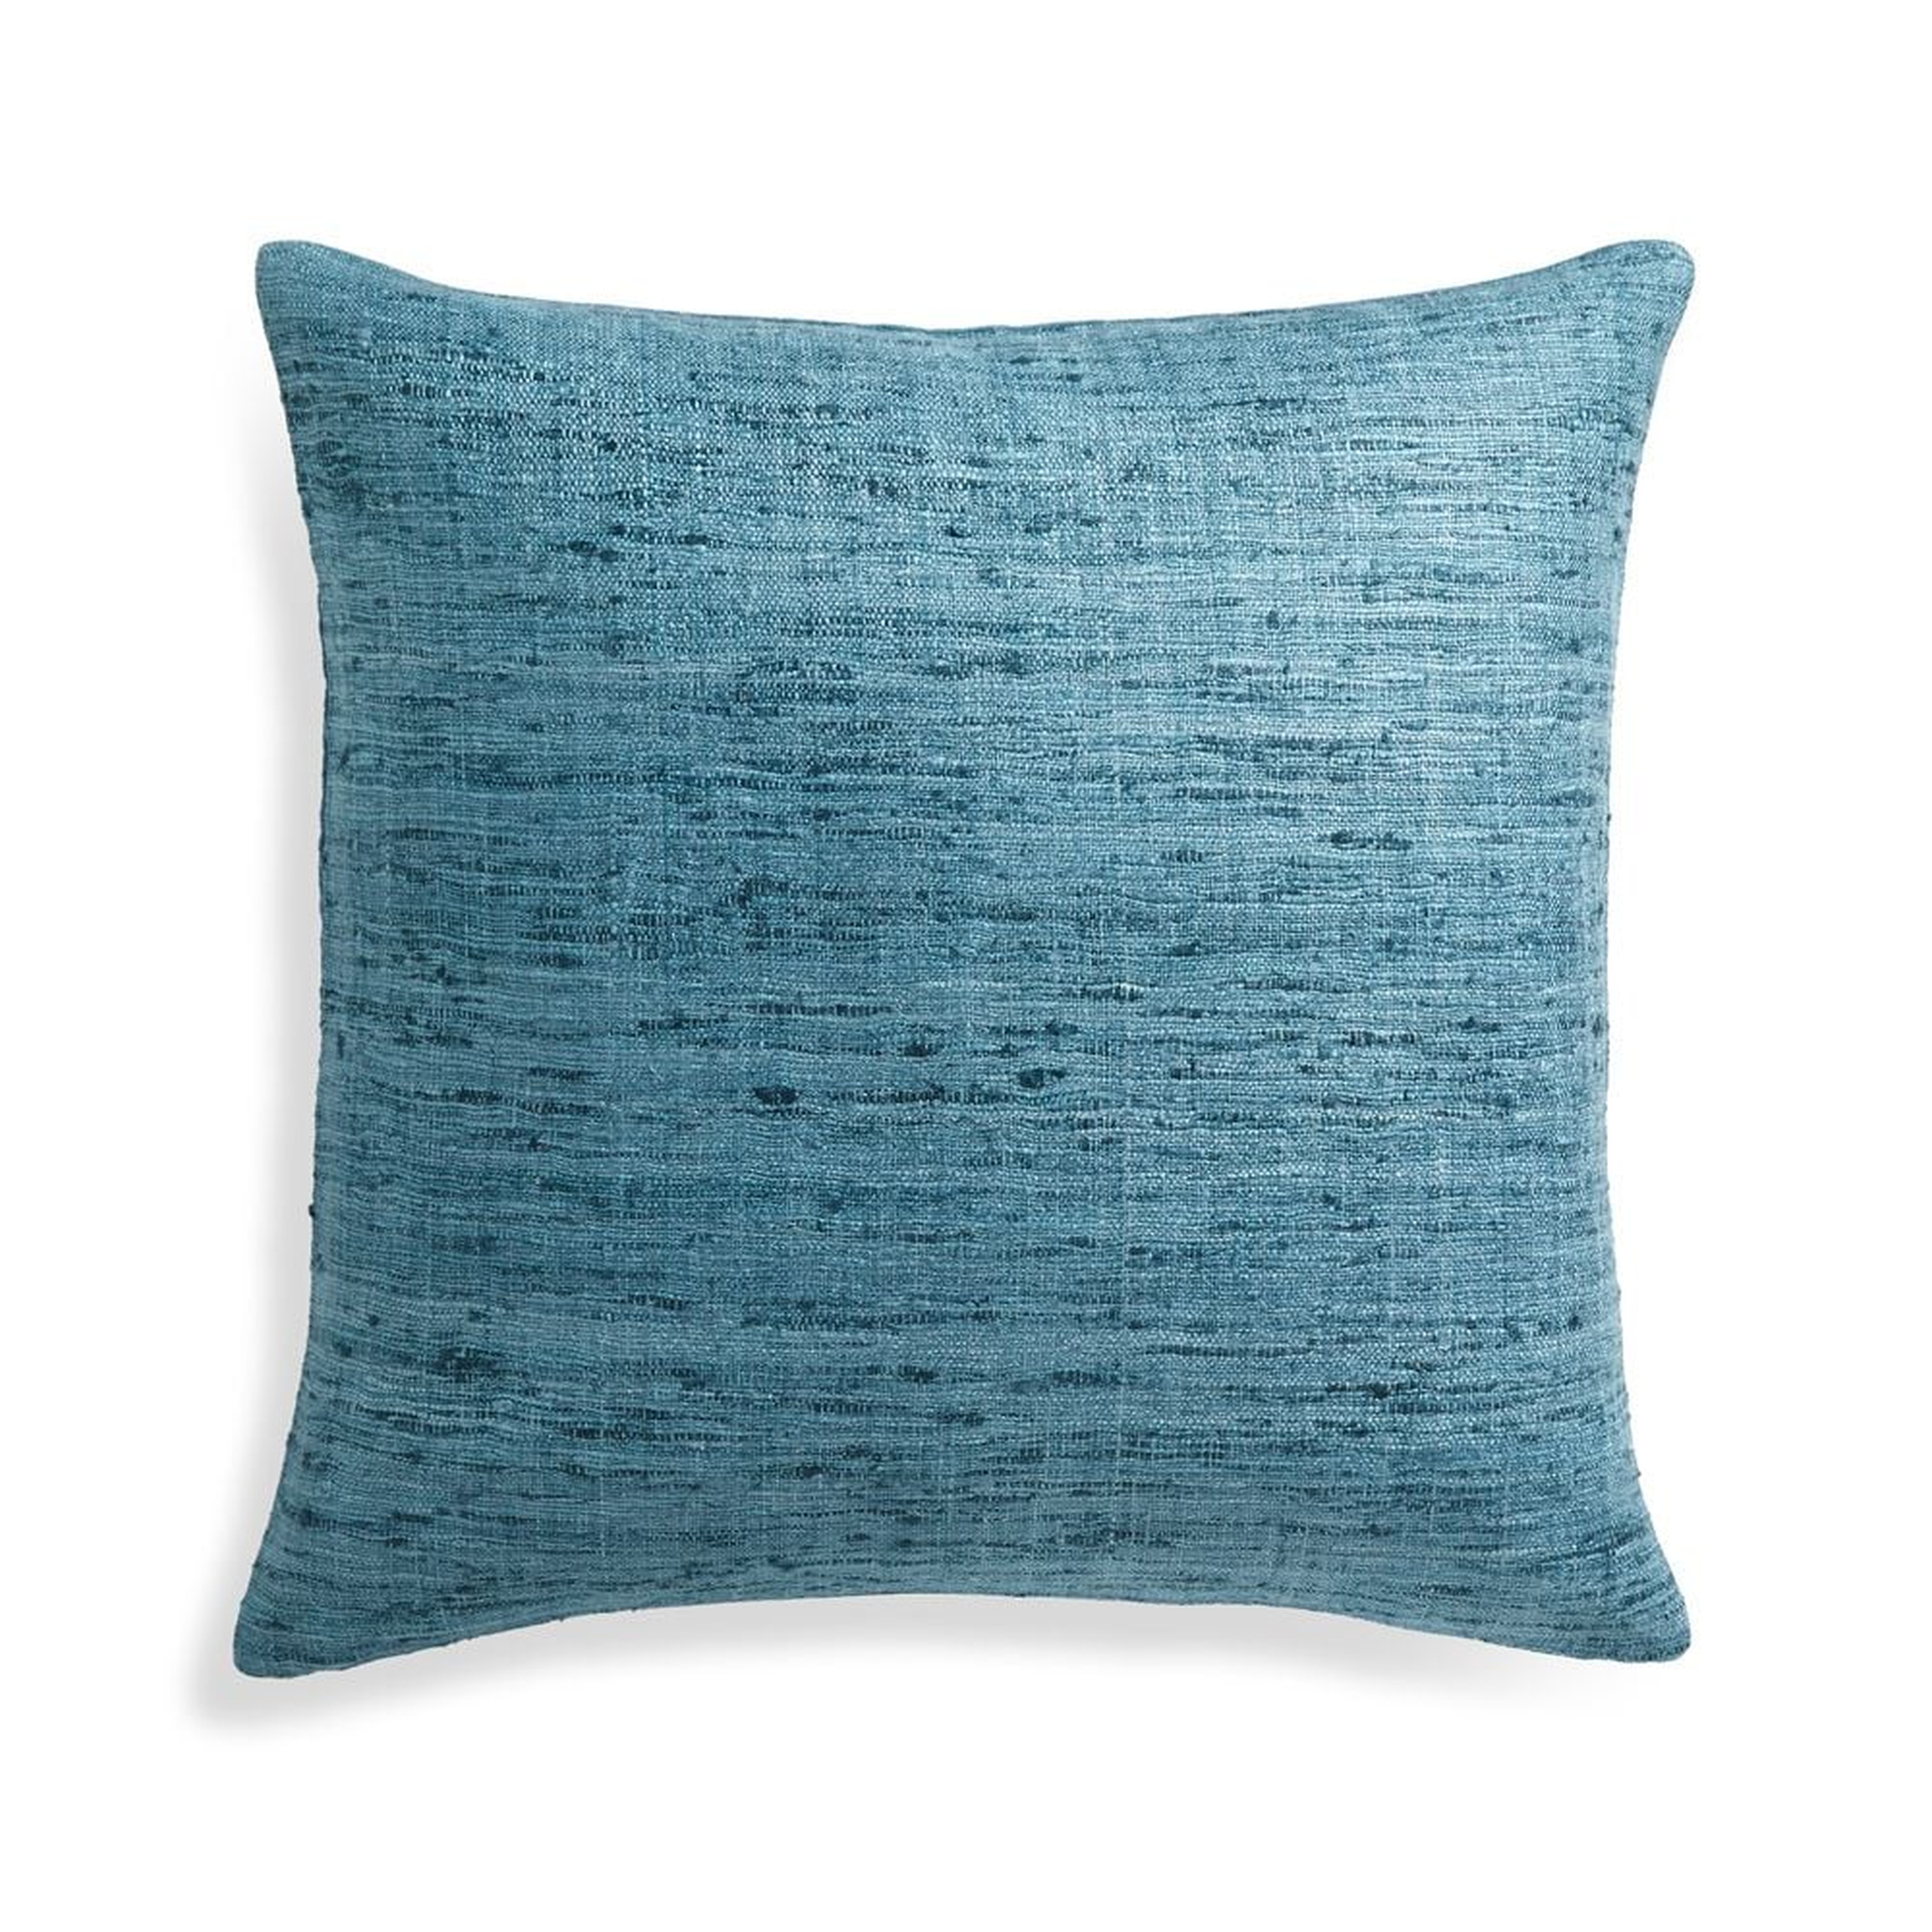 Trevino Teal Pillow Cover 20" Feather-Down Insert - Crate and Barrel